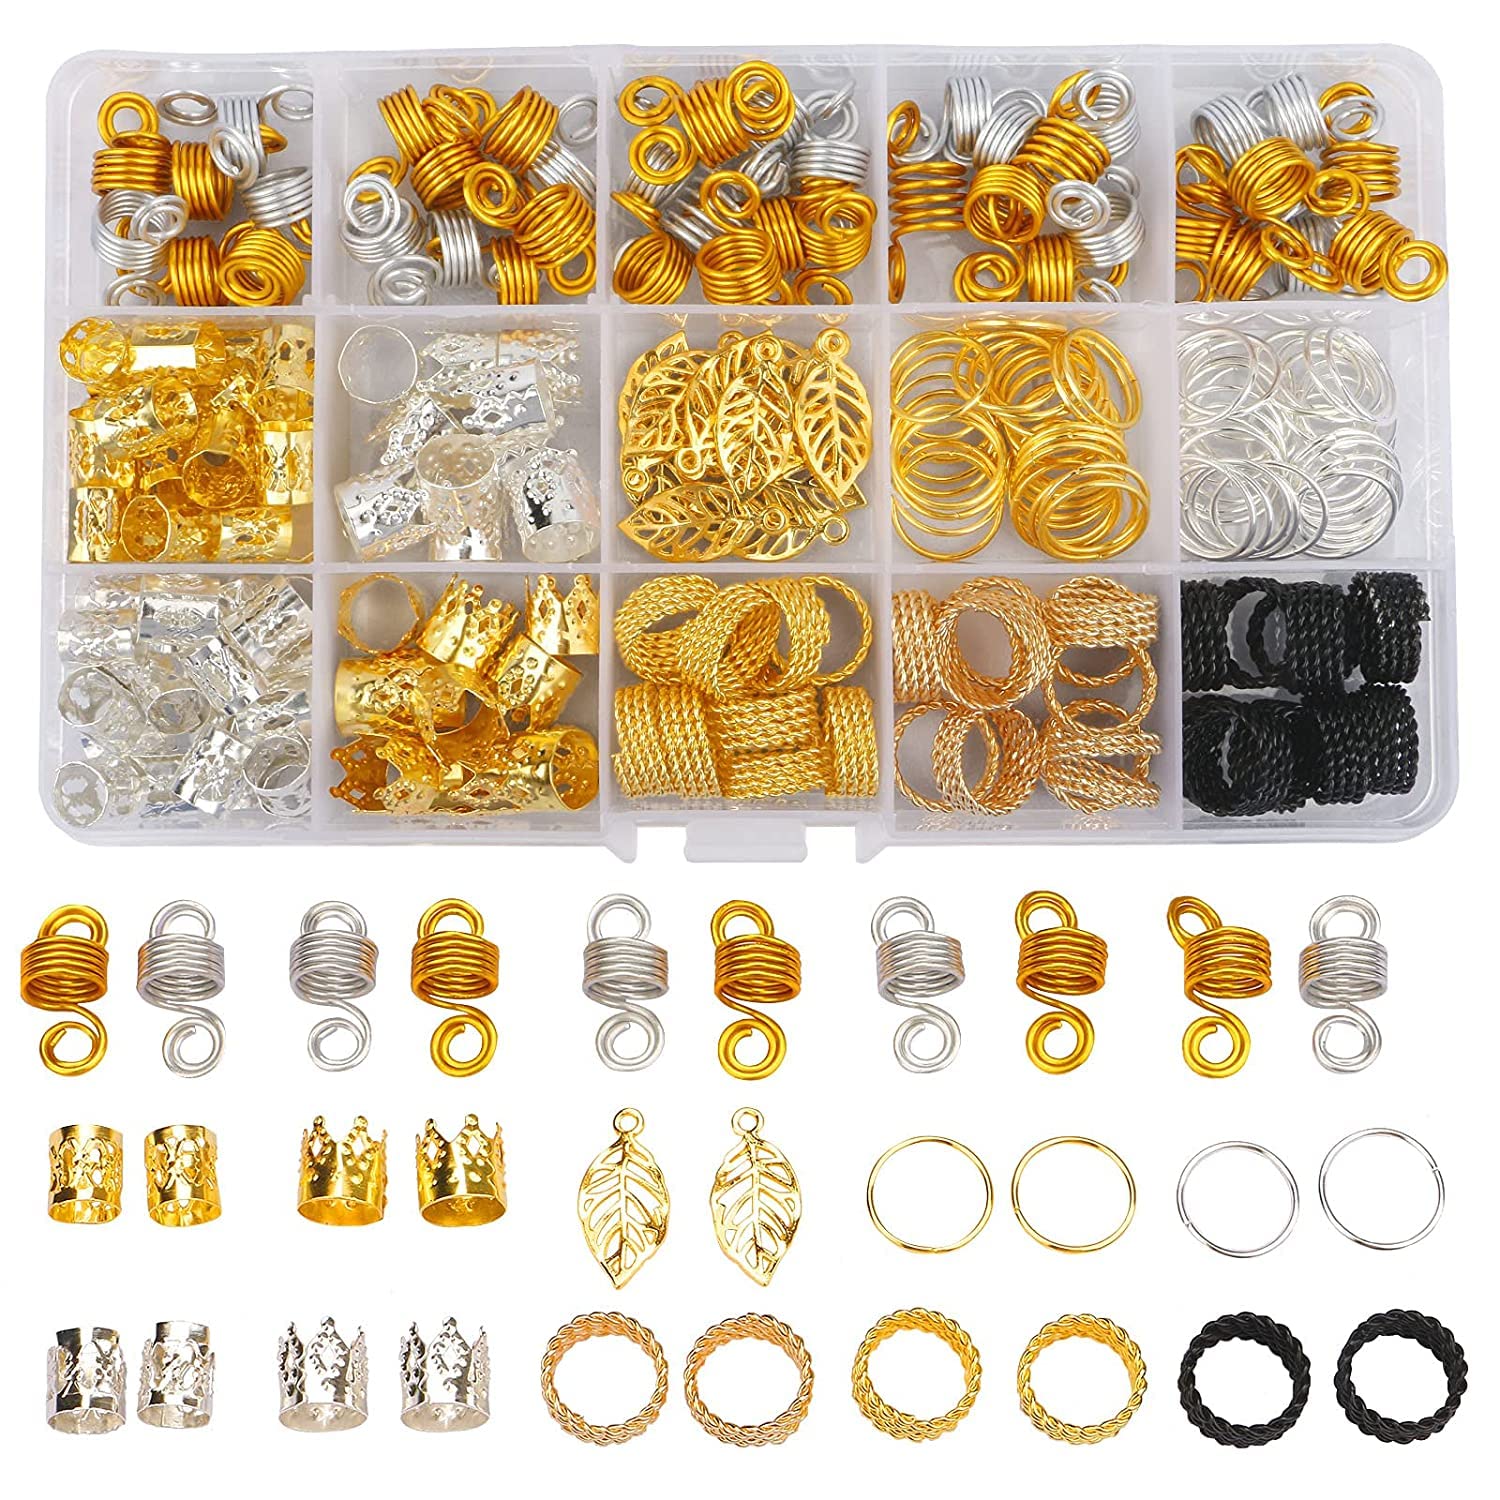 200PCS Hair Jewelry for Braids Accessories, Hair Beads for Braids, Gold Hair Accessories, Metal Gold Braids Rings Cuffs Clips for Dreadlock Accessories Hair Decorations